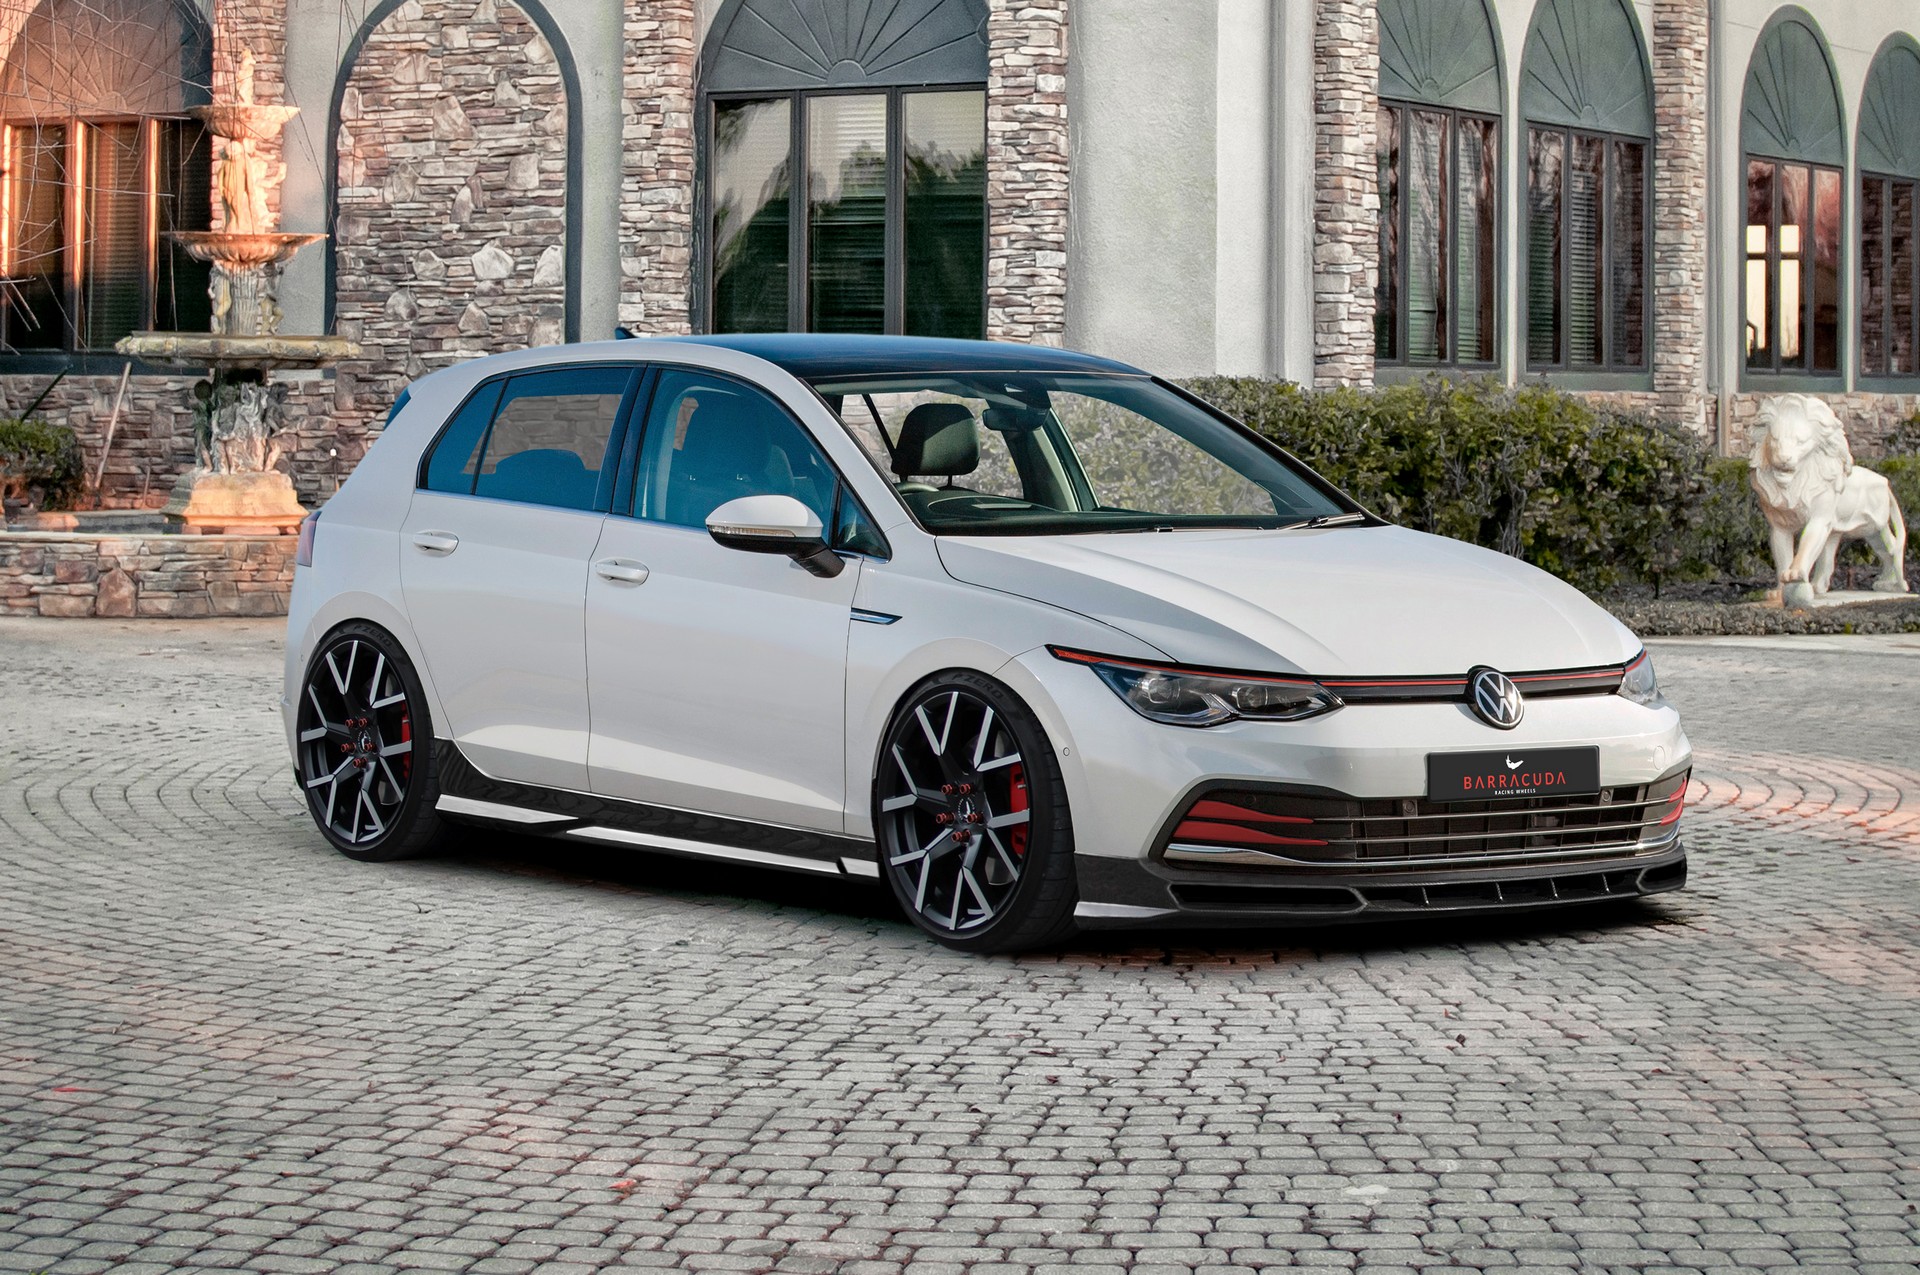 New 2020 VW Golf Mk8 Tuning Program Previewed By JMS Carscoops